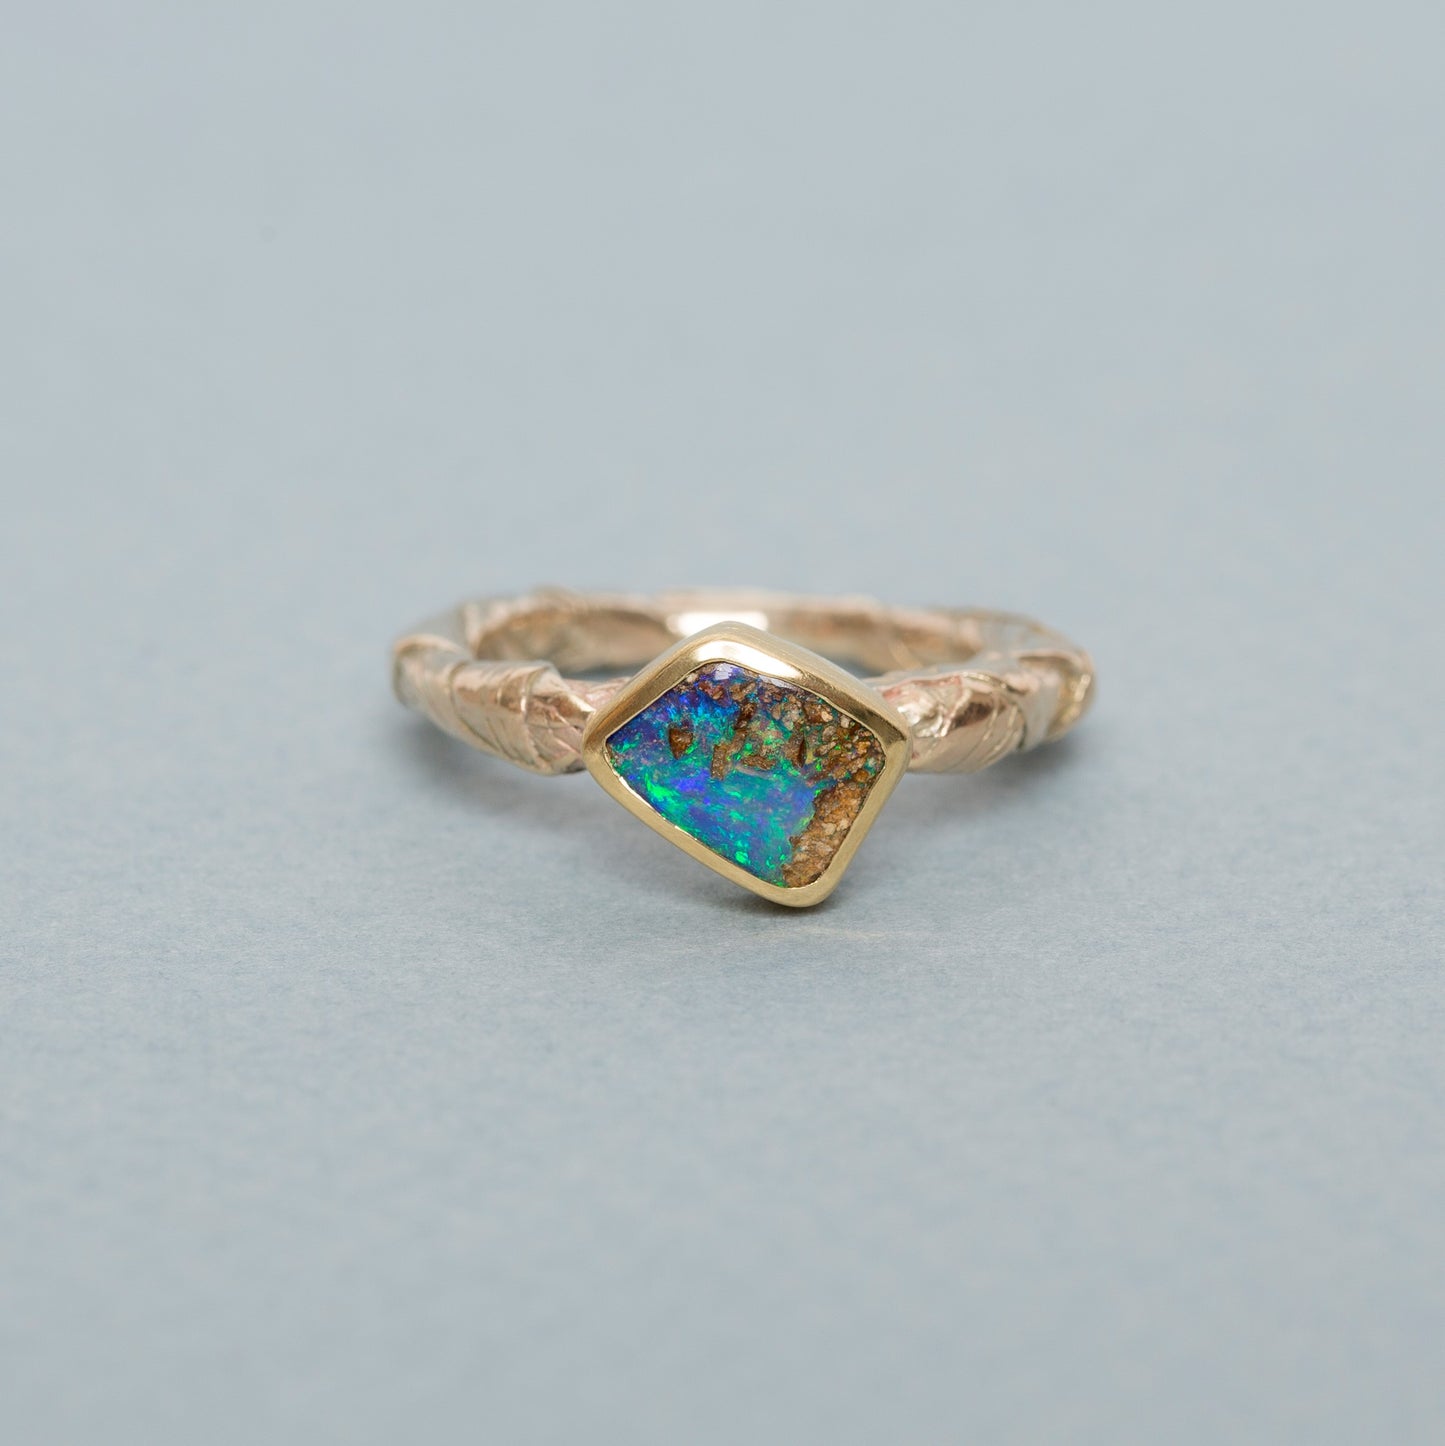 Woven ring with opal